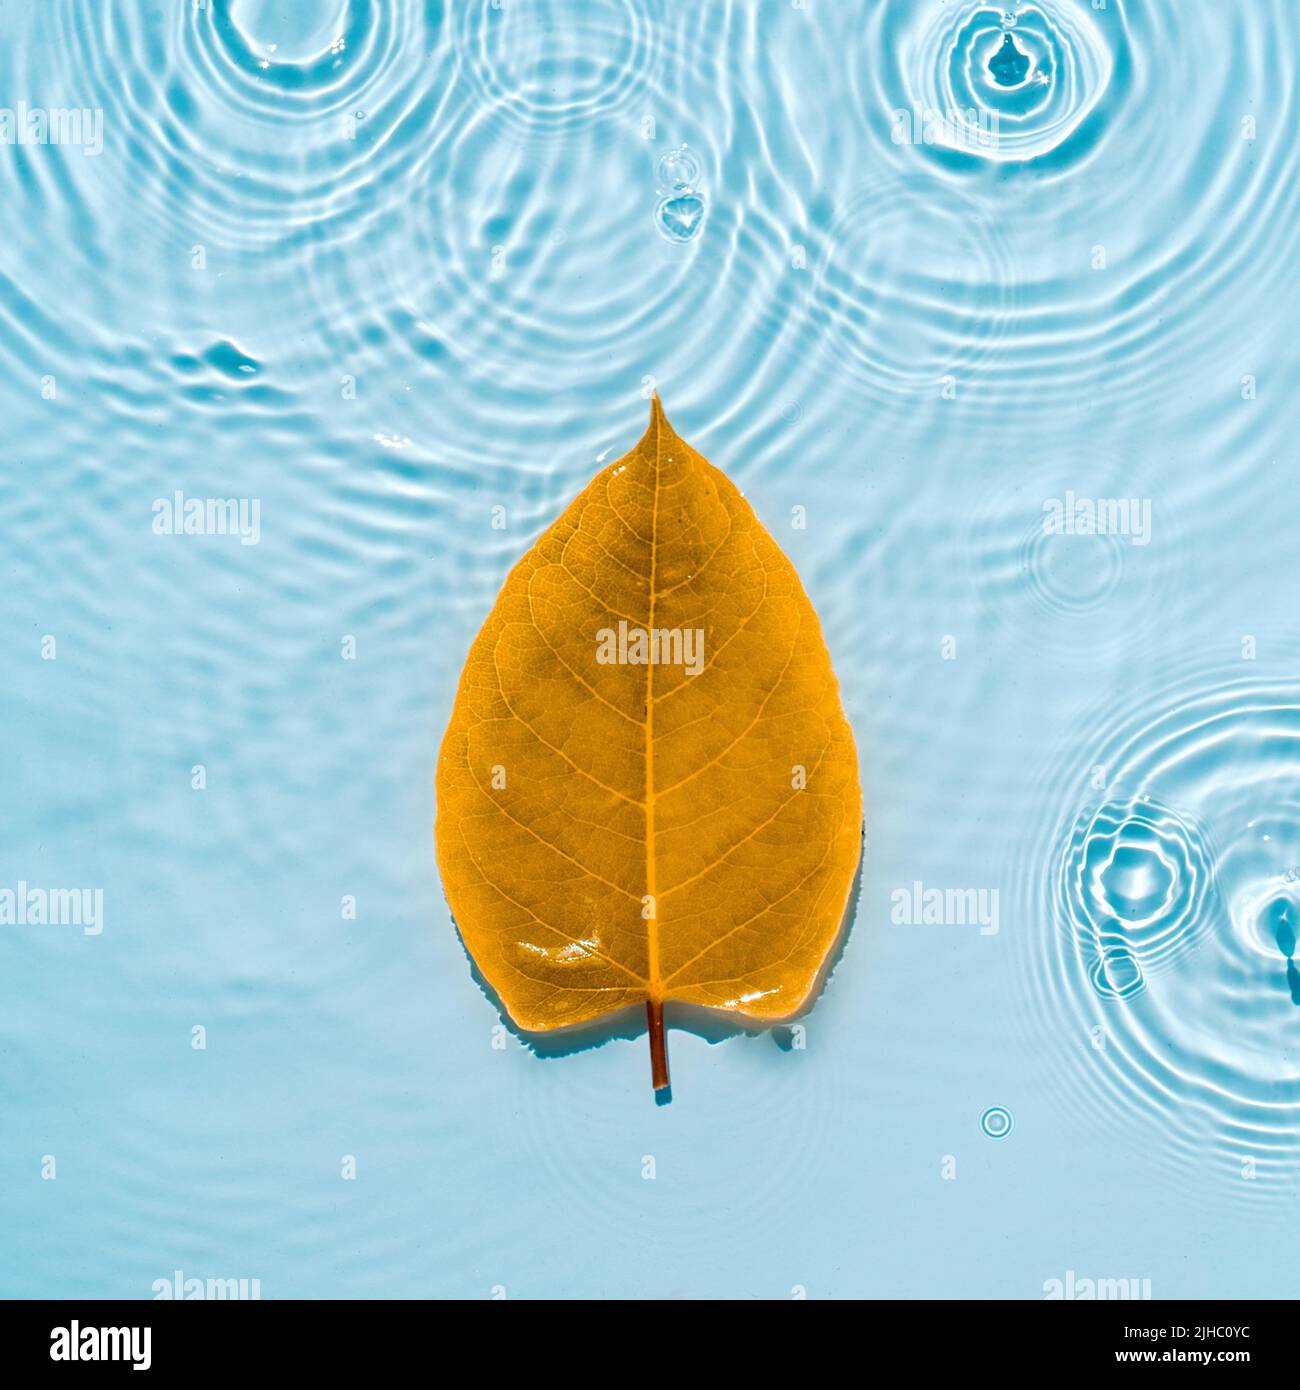 Yellow, autumn leaf against the background of blue water with drops, rings and ripples from raindrops Autumn backdrop for design. Flat lay, minimal Stock Photo